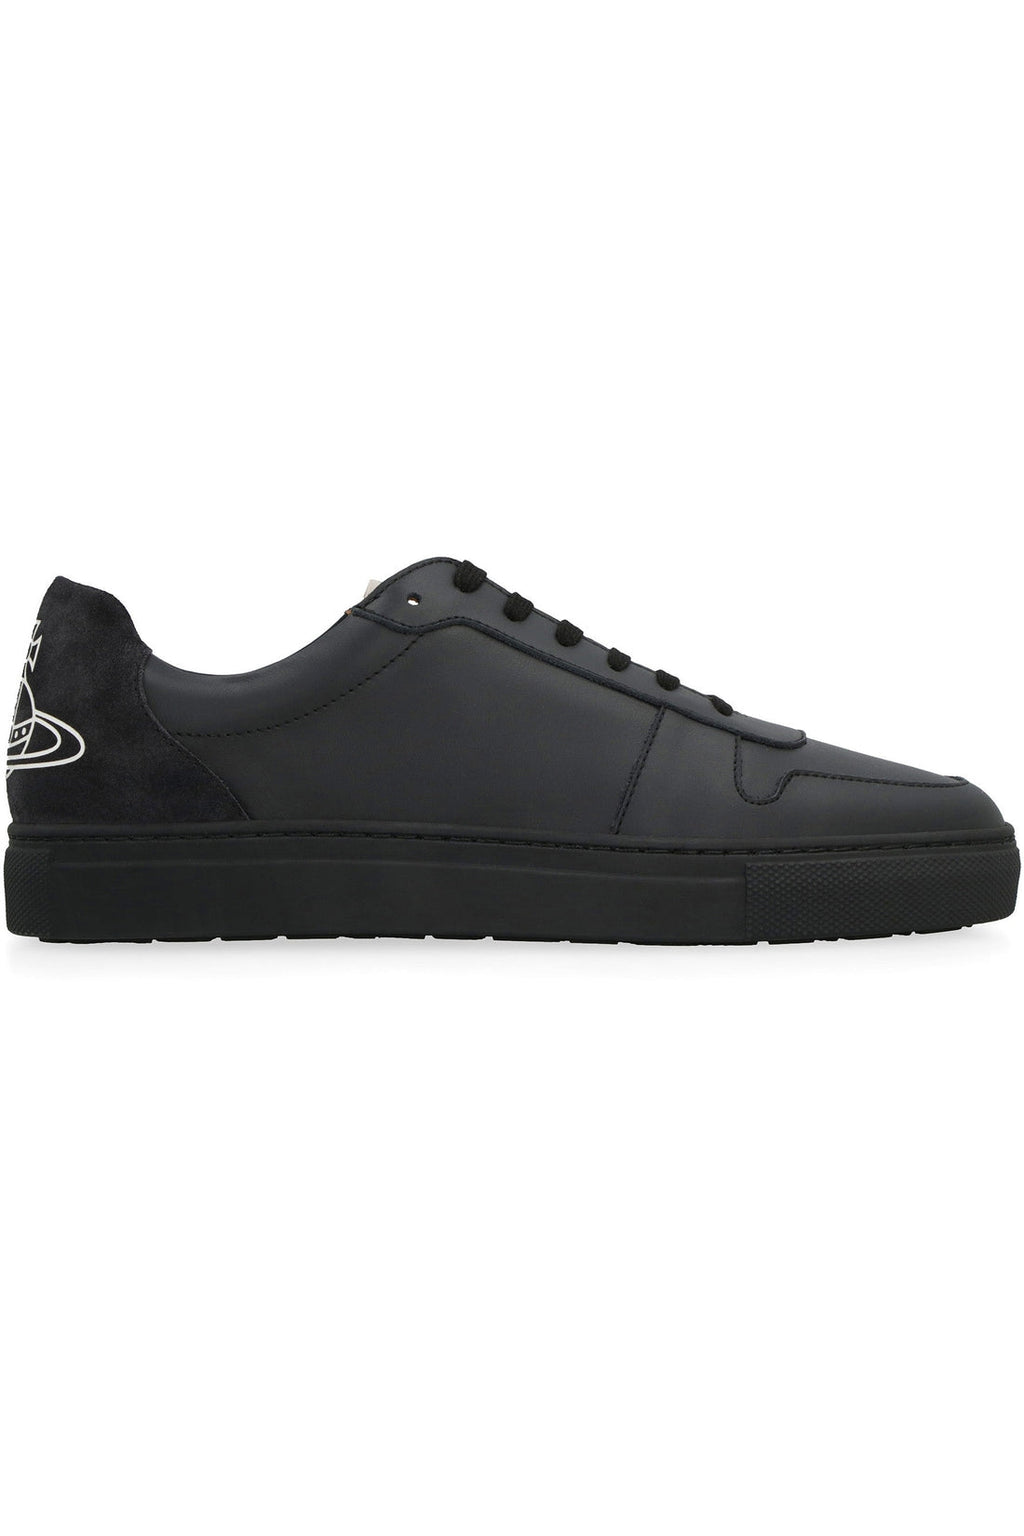 Vivienne Westwood-OUTLET-SALE-Classic Trainers leather low-top sneakers-ARCHIVIST